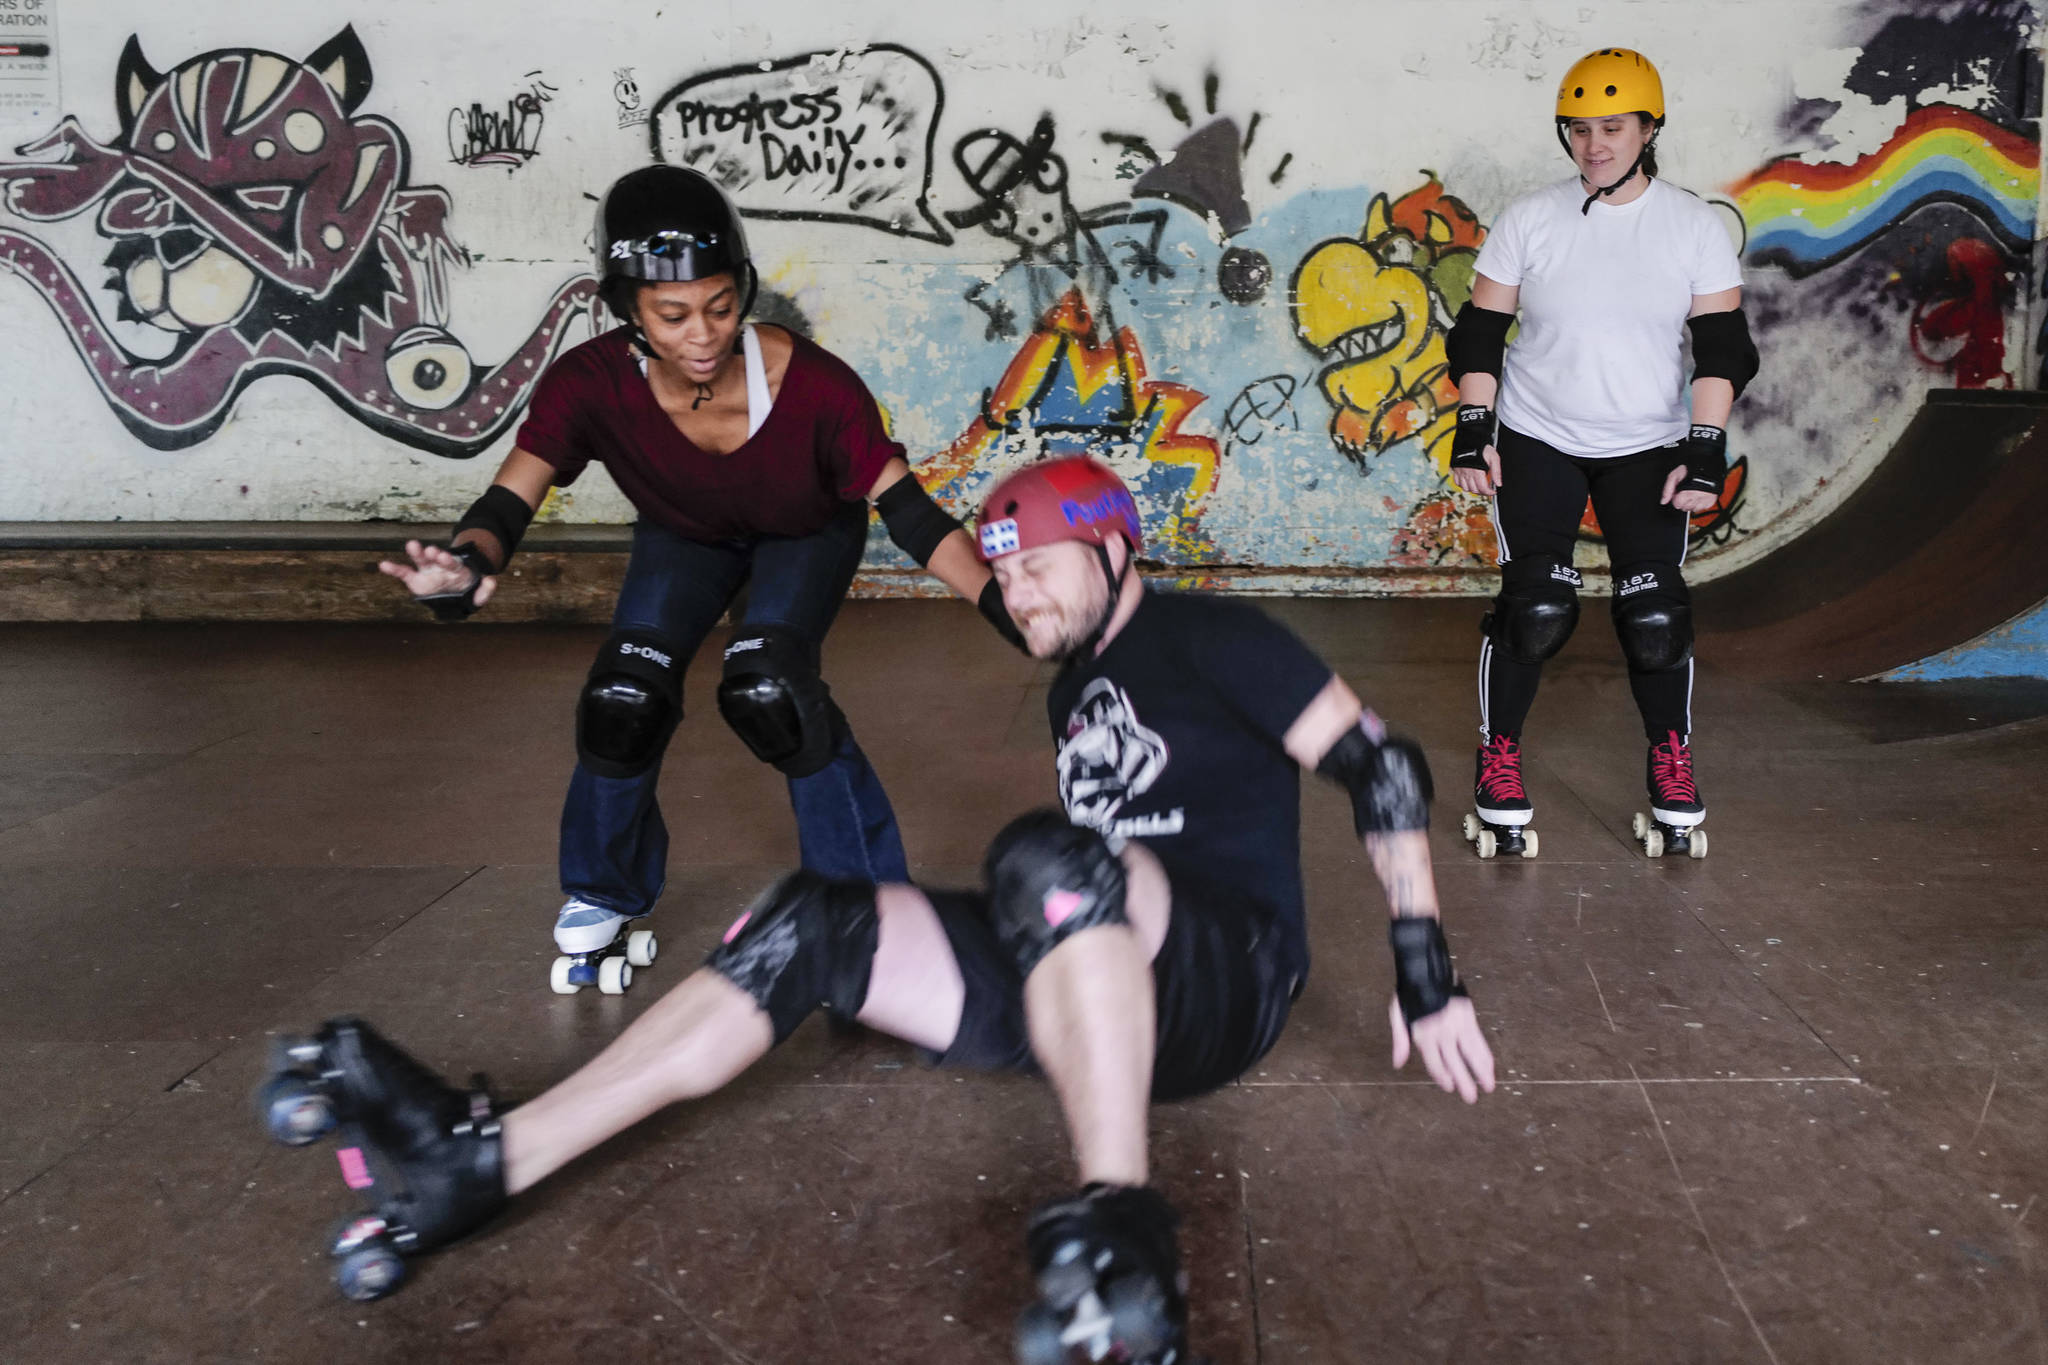 Empire reporter Michael S. Lockett takes a fall while being taught to rollerskate by Jennifer Gross, left, and Shabadrang Khalsa at the Pipeline Skate Park on Friday, Oct. 11, 2019. (Michael Penn | Juneau Empire)